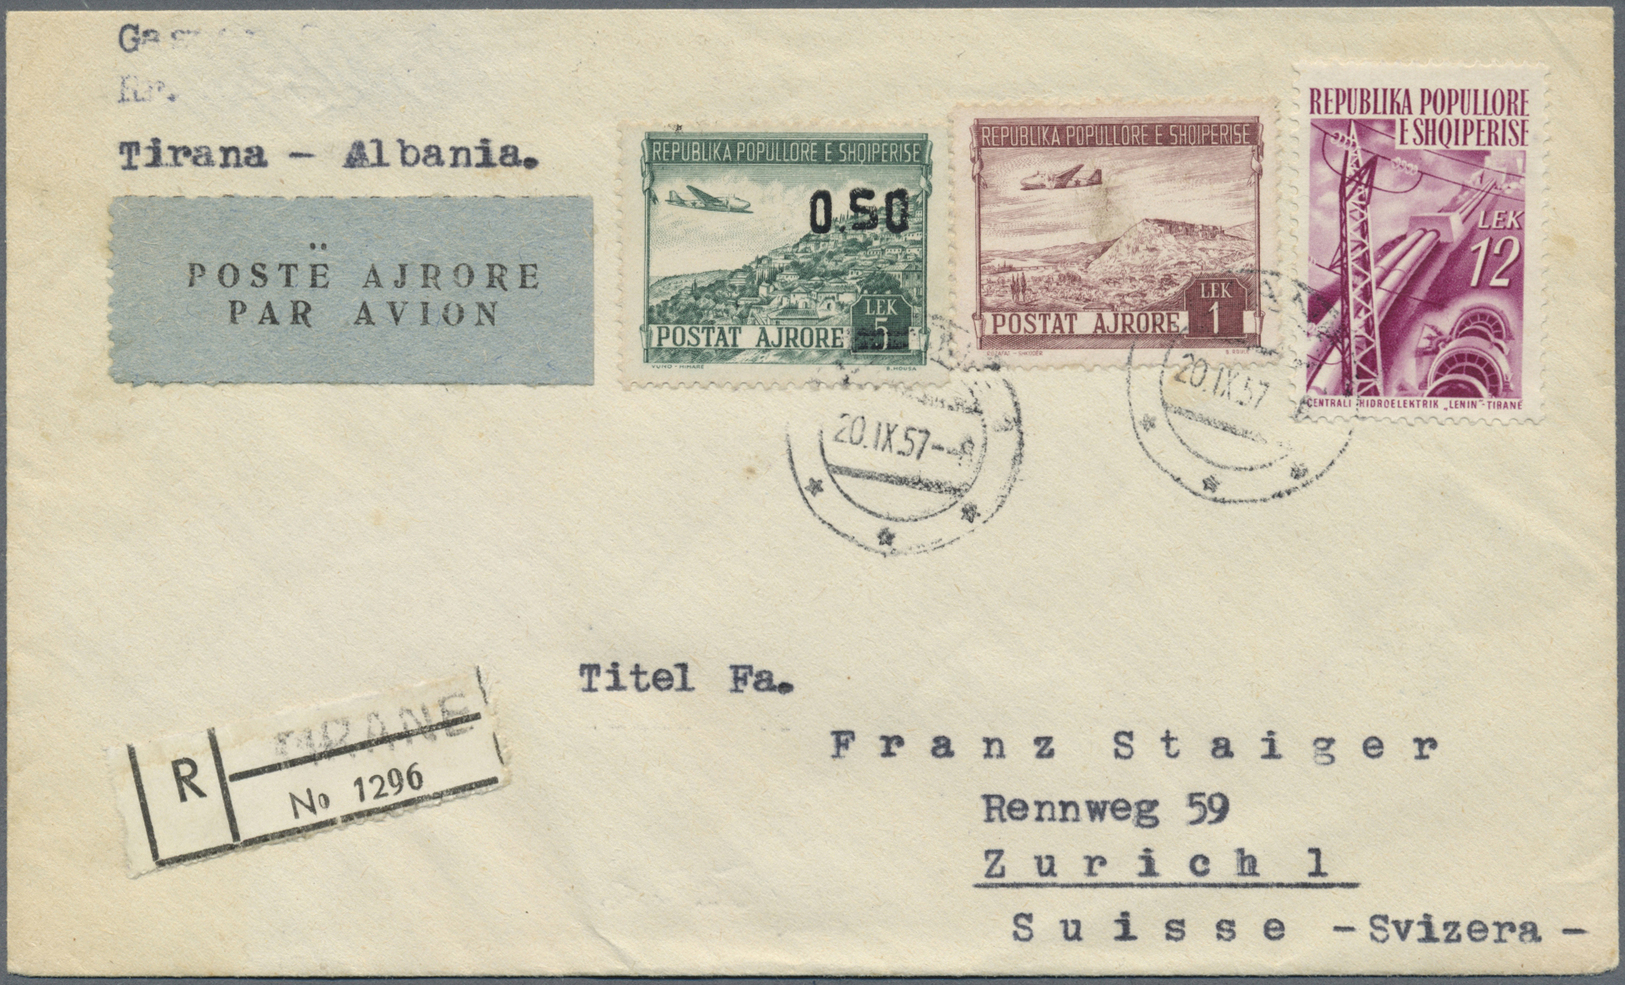 Br Albanien: 1953, Airmail Overprint 0.50 On 5l. Green, Mixed Franking On Registered Airmail Cover From "TIRANE 2 - Albania